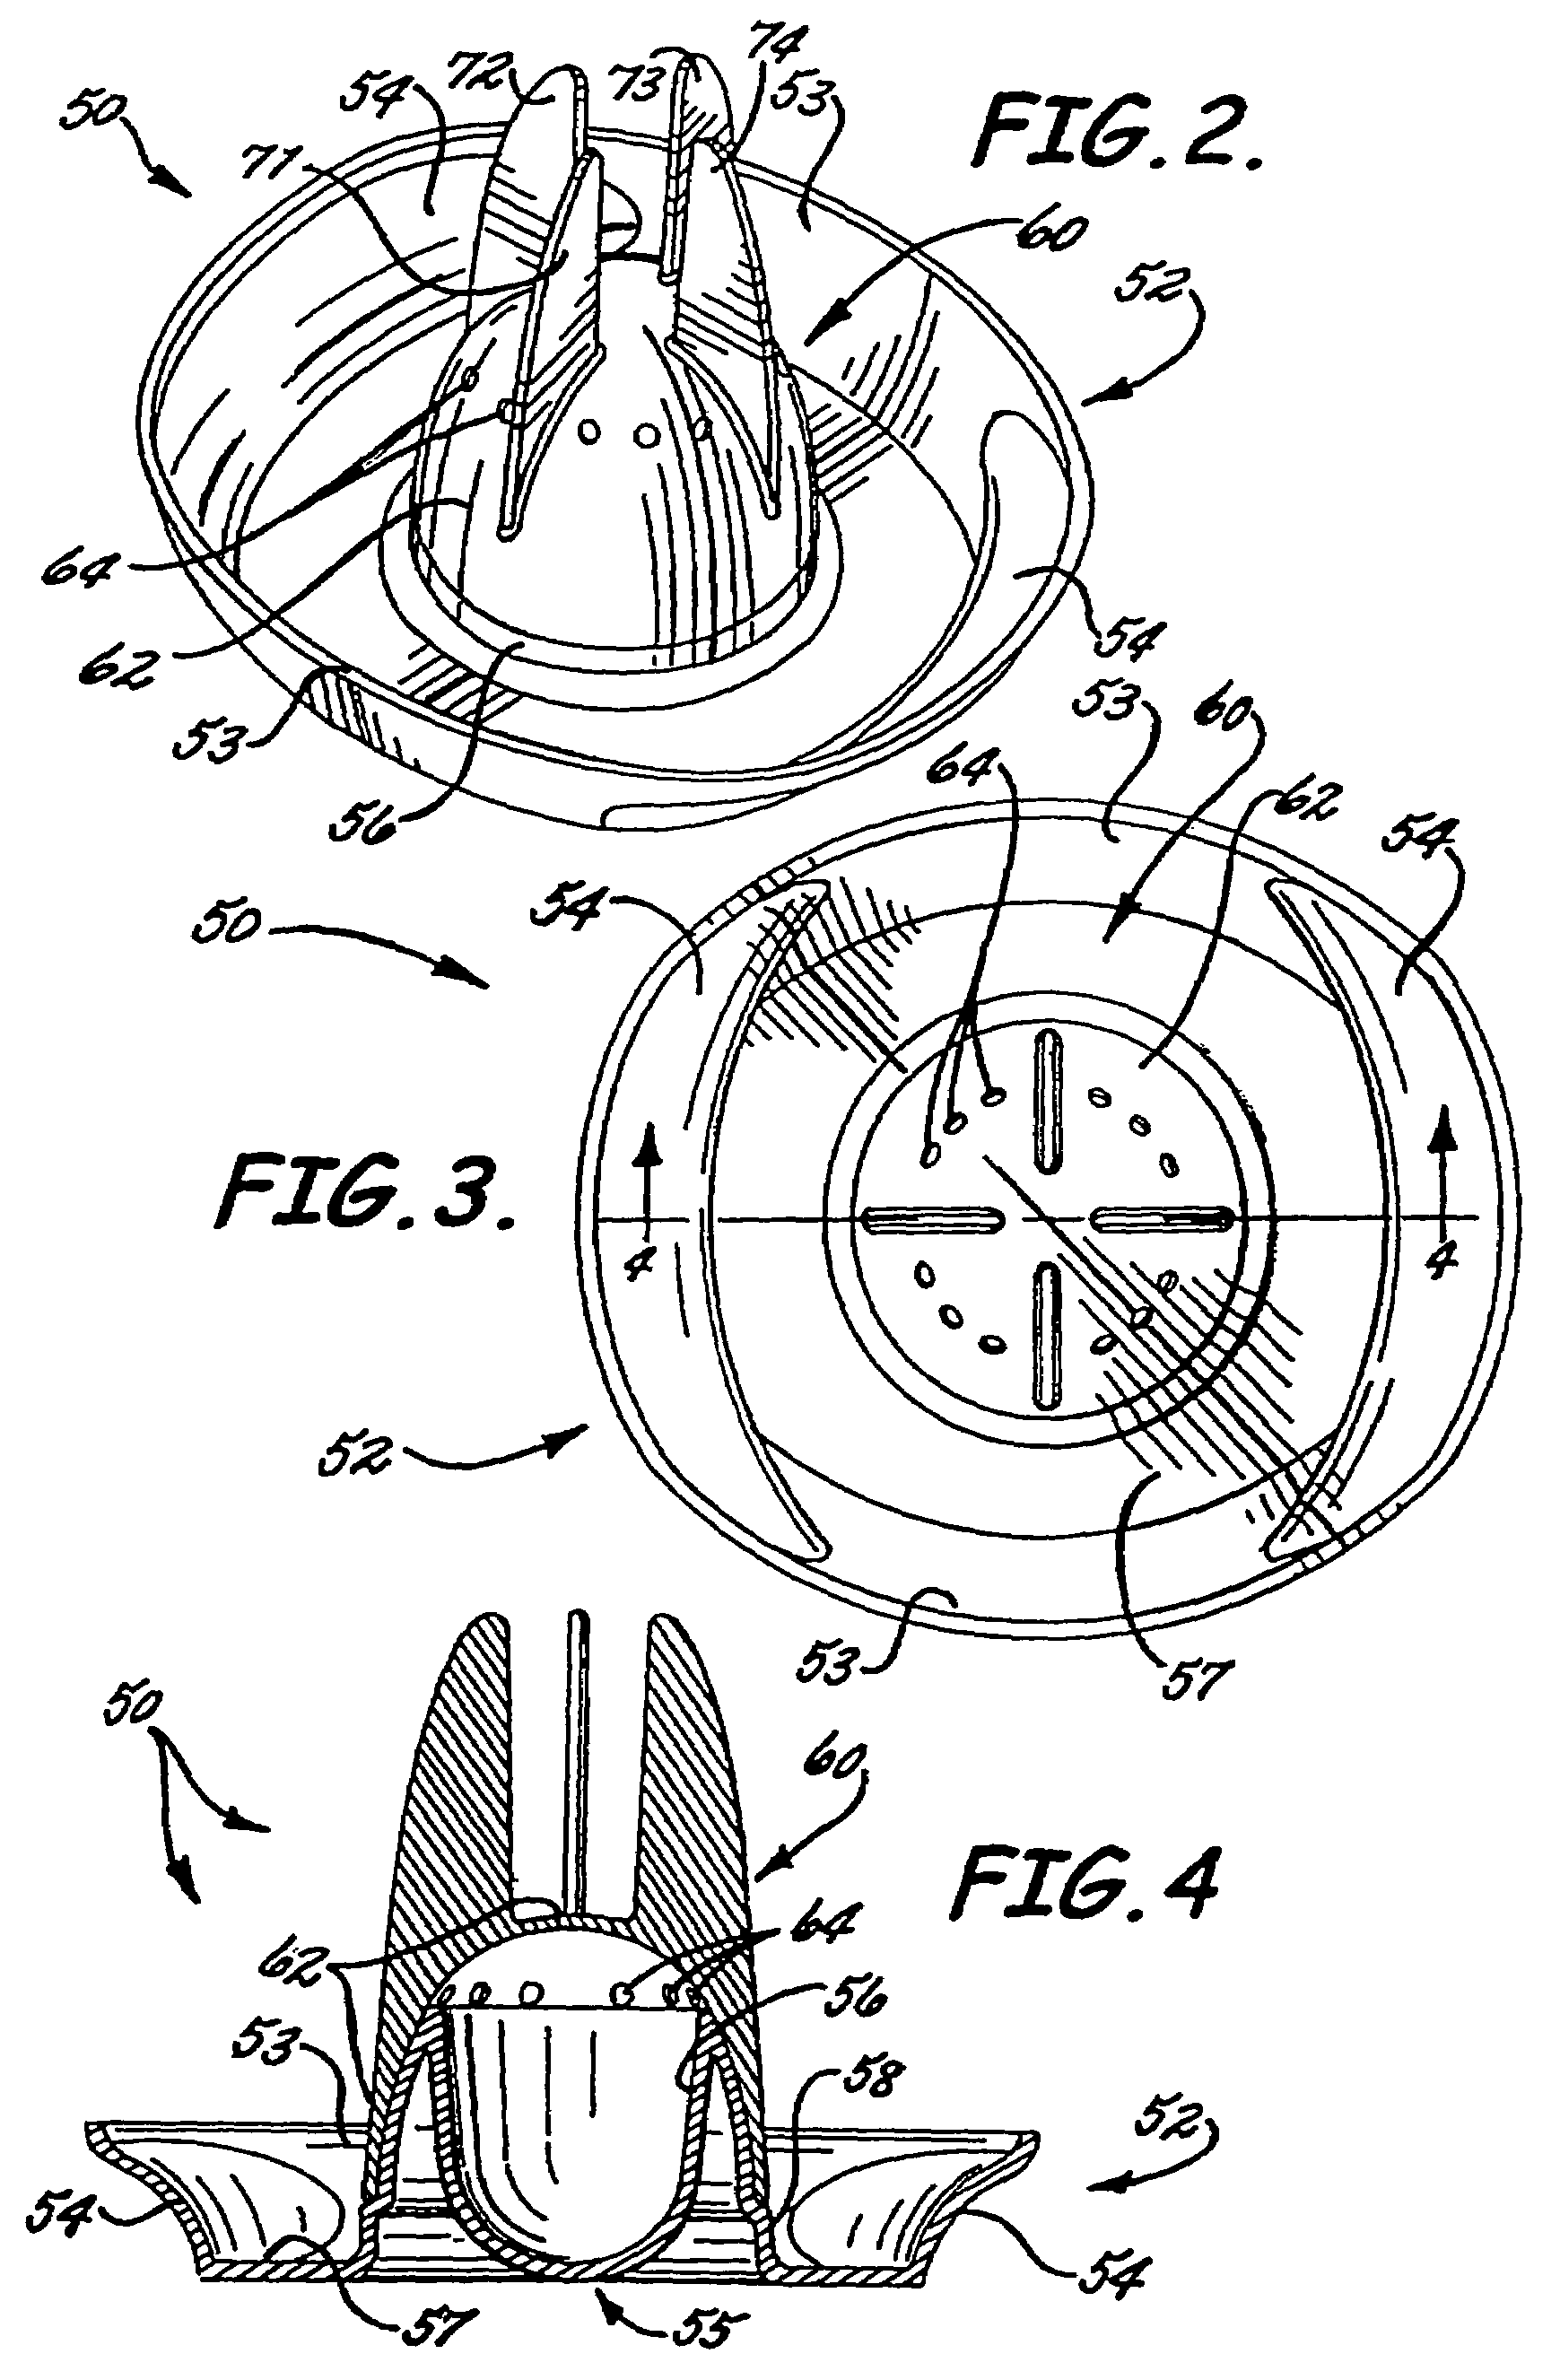 Apparatus for cooking meat